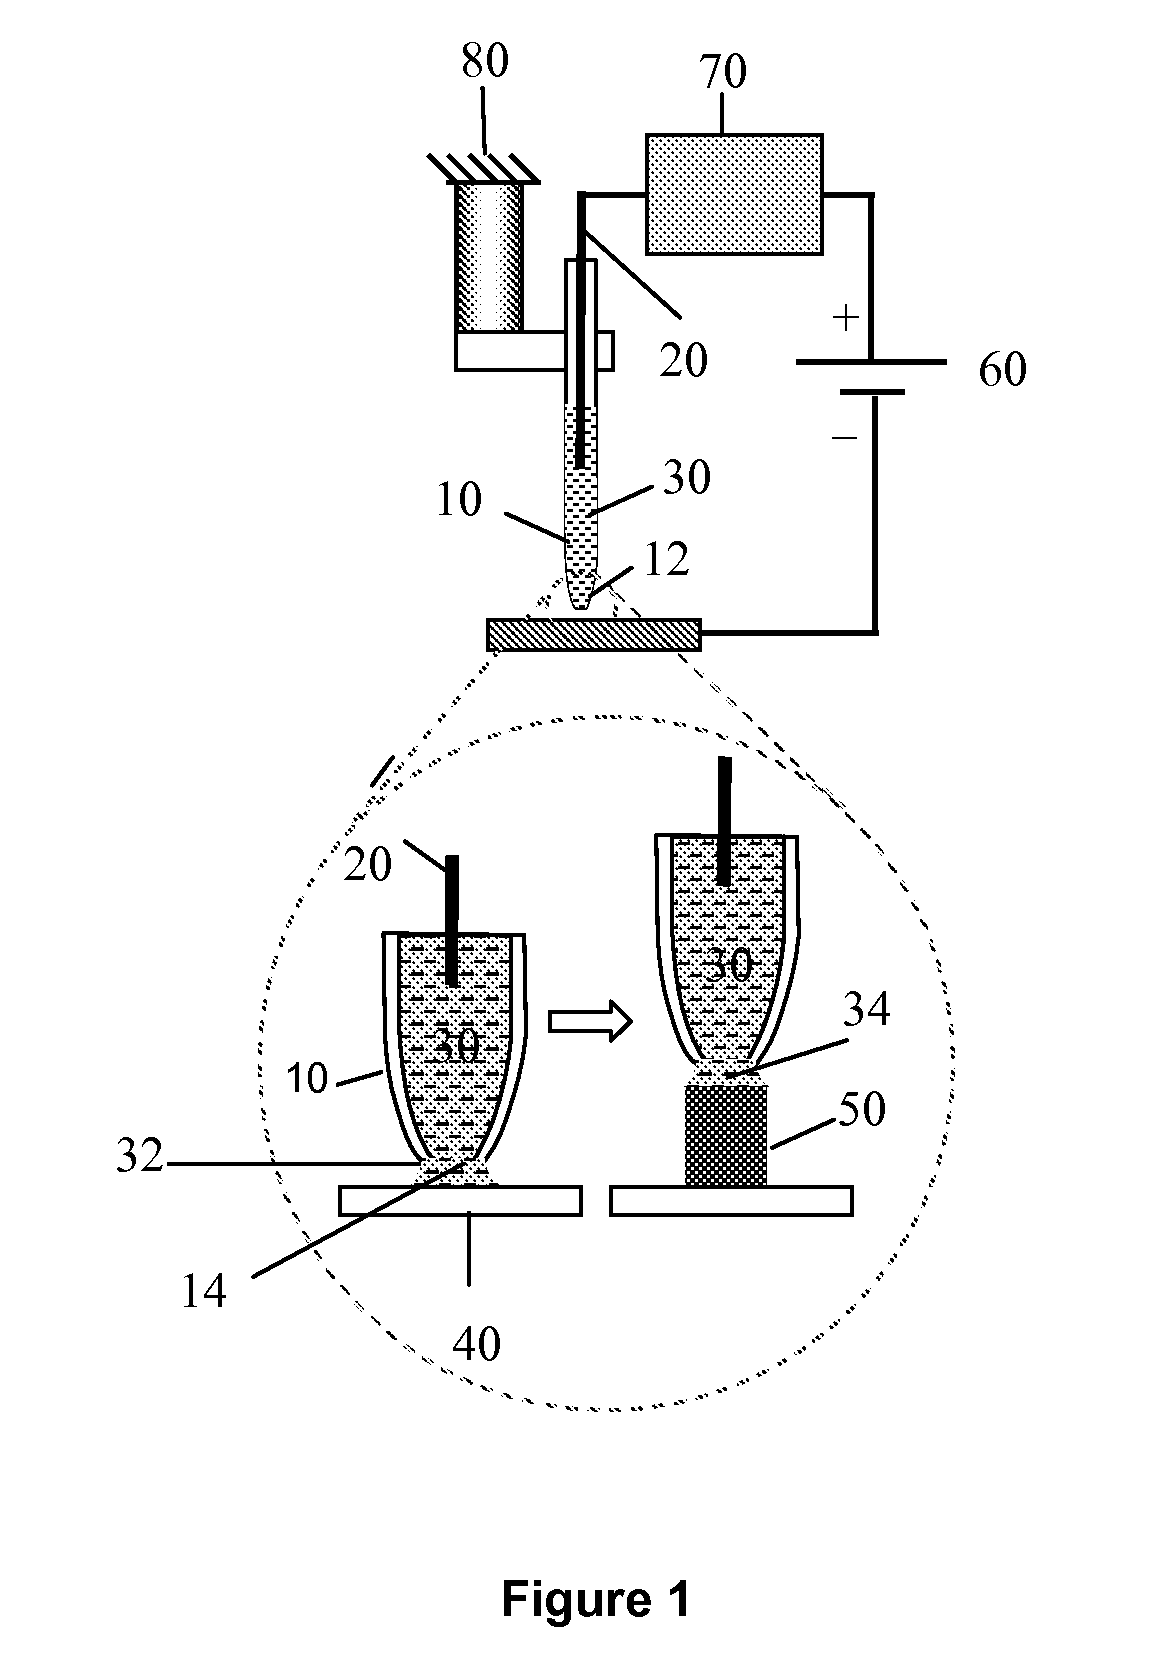 Electrochemical deposition platform for nanostructure fabrication